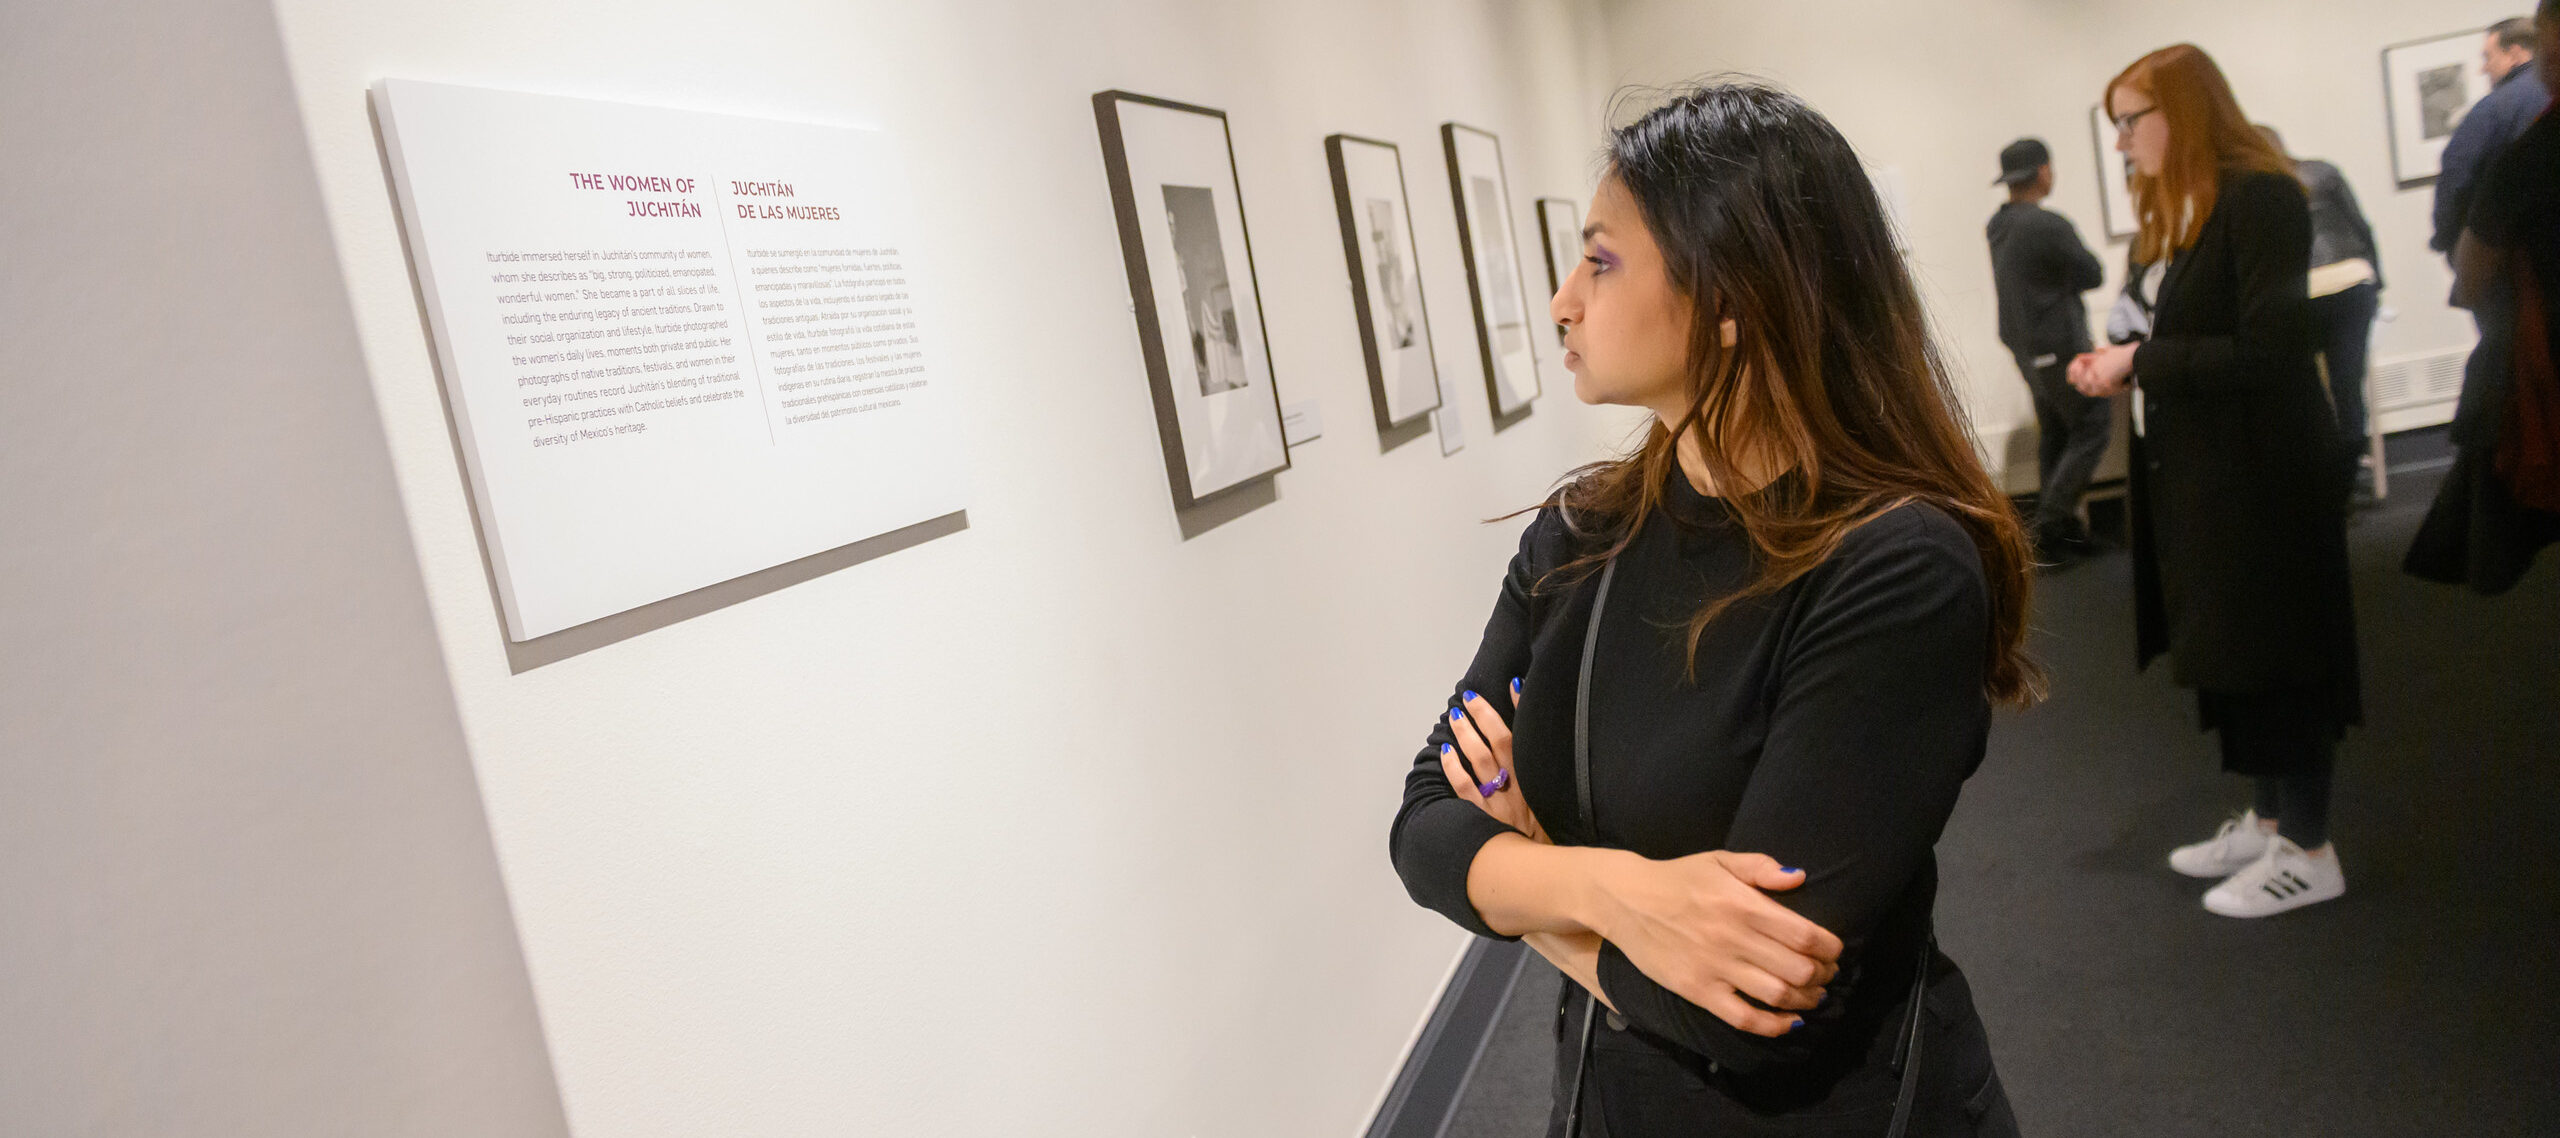 A medium light-skinned young woman in a black top crosses her arms while reading a gallery exhibition label intently.